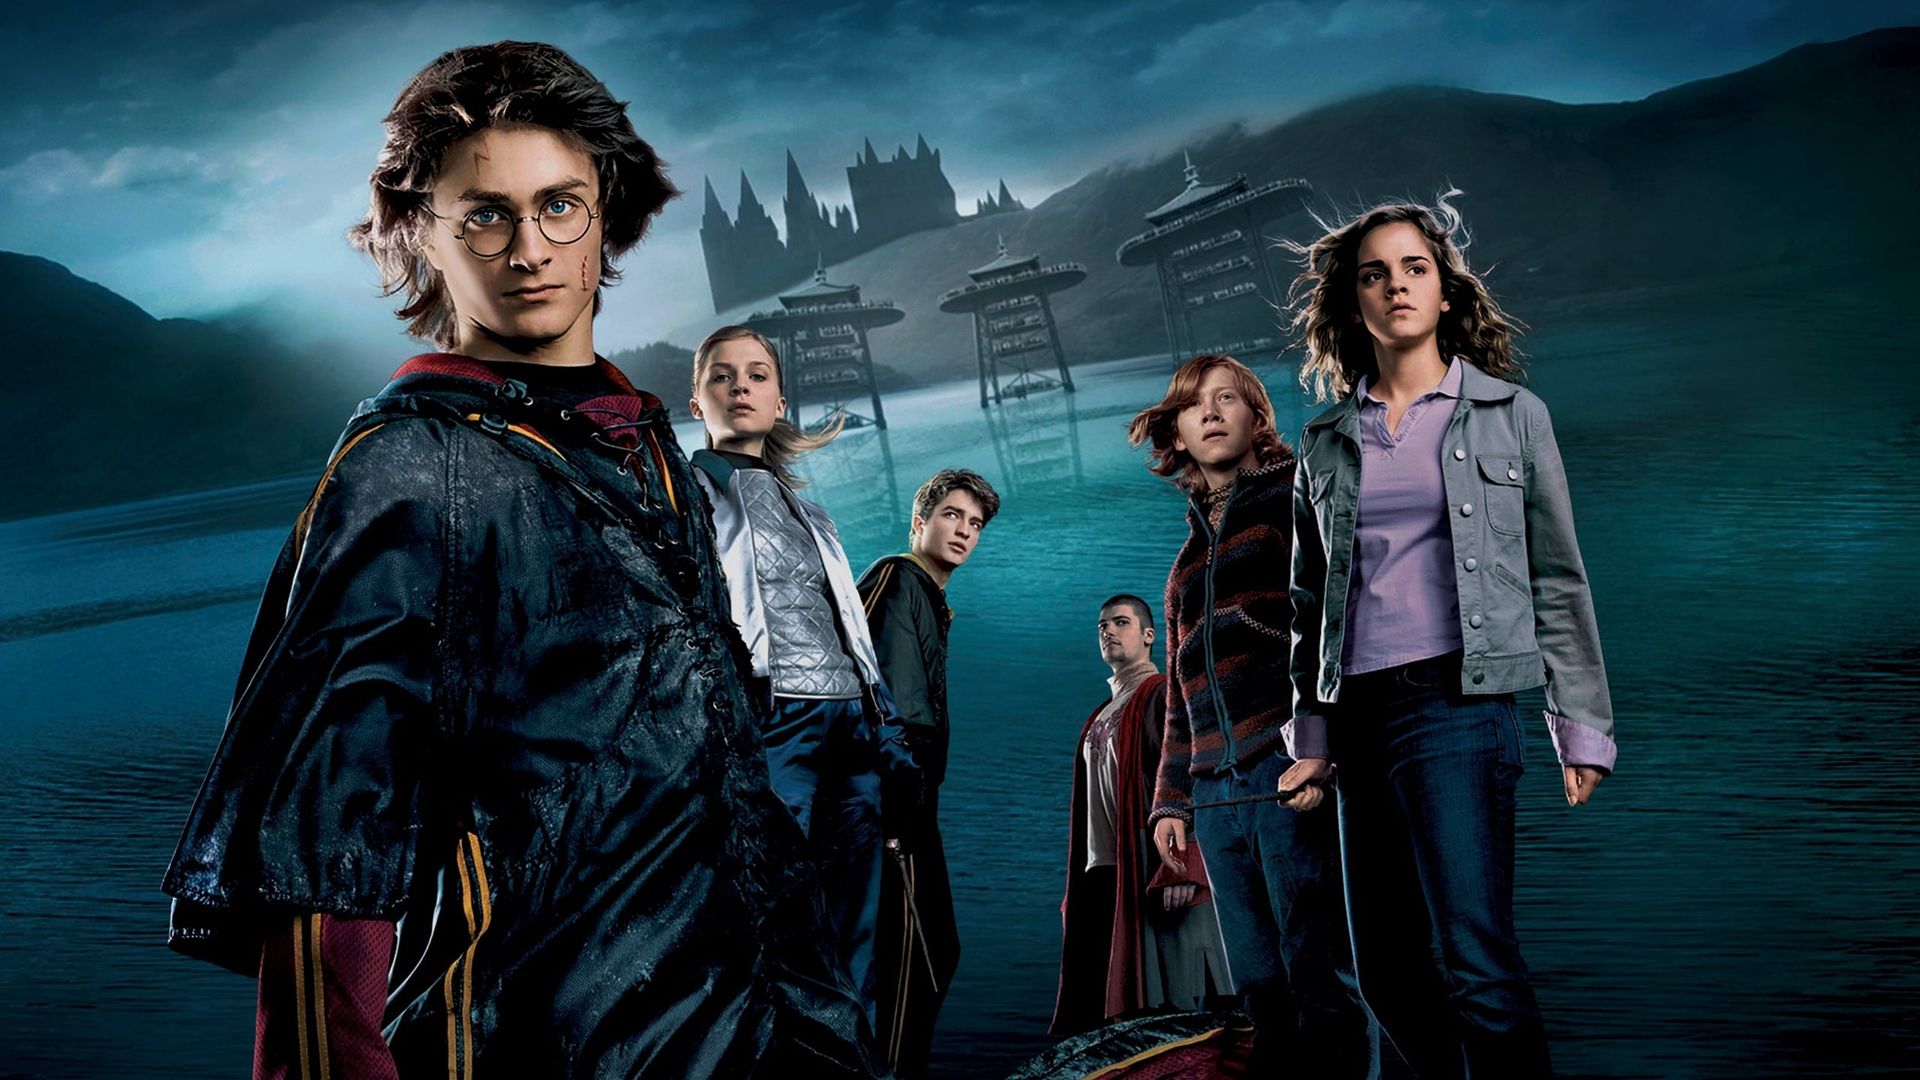 Harry Potter and the Goblet of Fire (2005) - “Cast” credits - IMDb